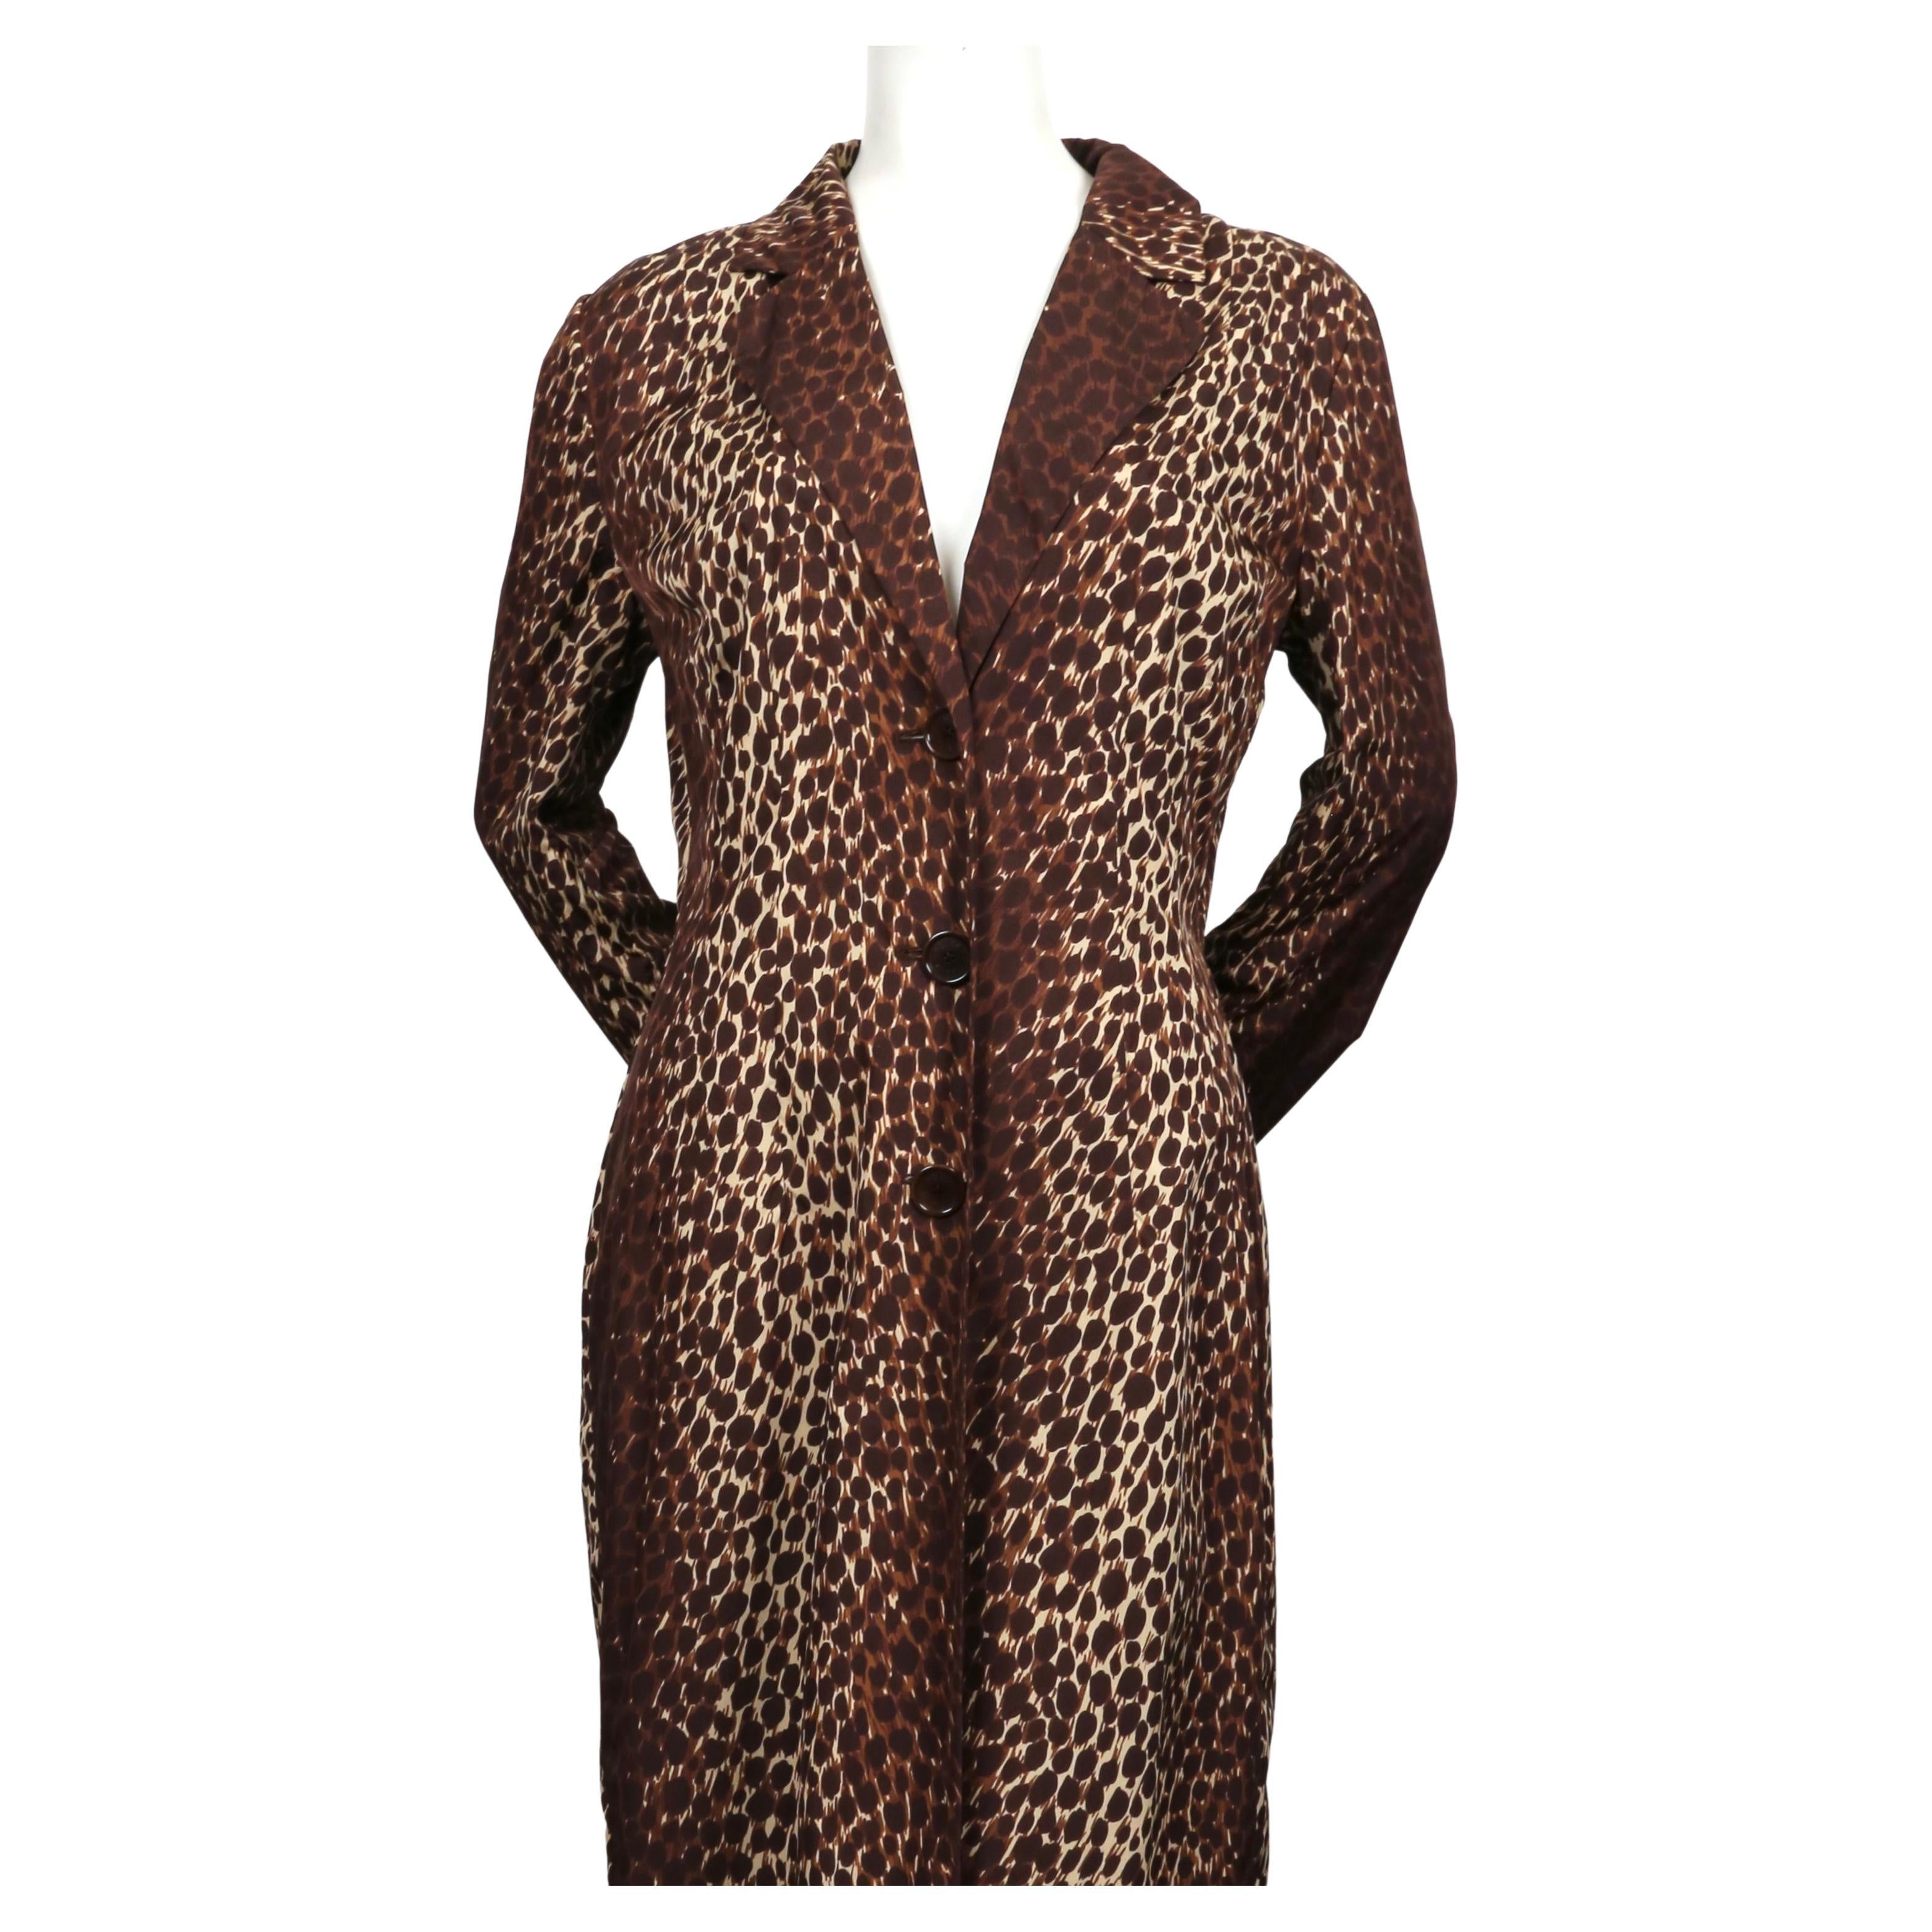 Long leopard print coat from Dolce and Gabbana dating to the 1990's. Labeled an Italian 44. Approximate measurements: shoulder 17